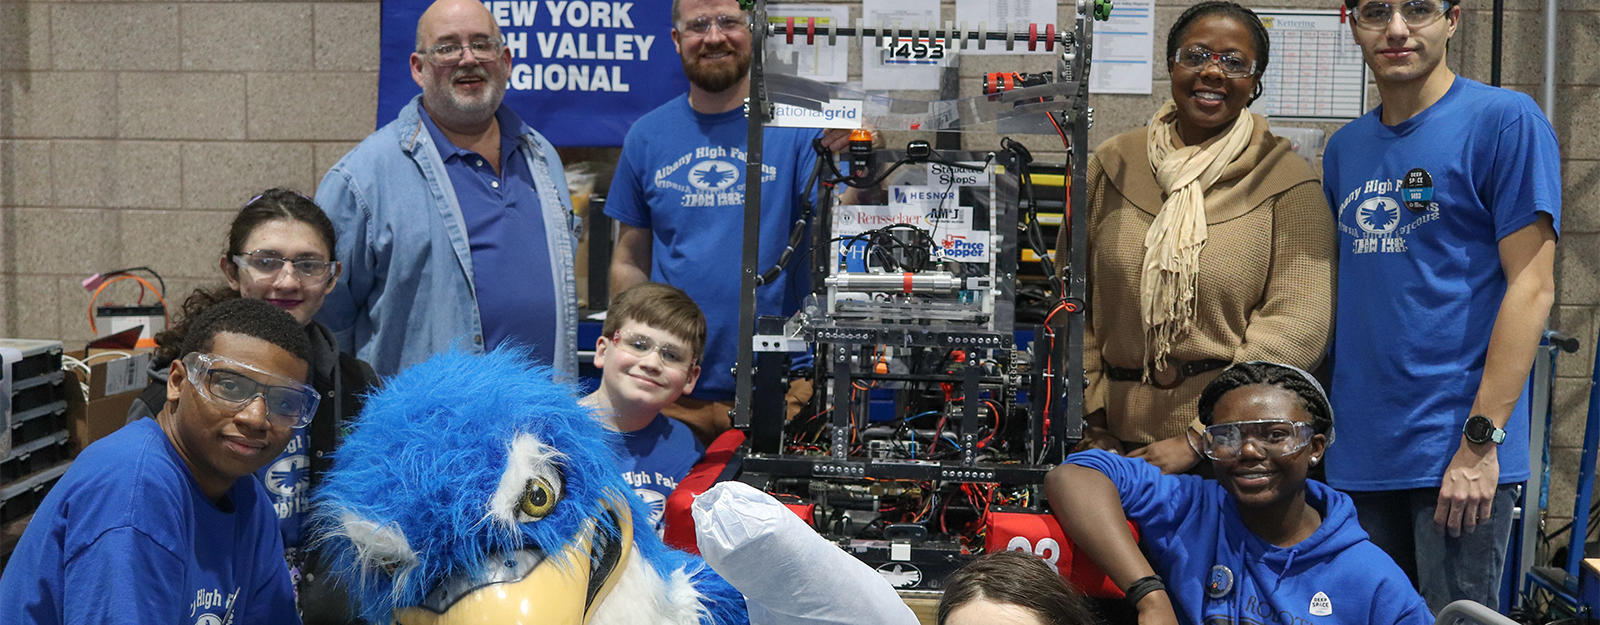 Robotics team posing for a group picture with the ʿ High Falcon mascot.